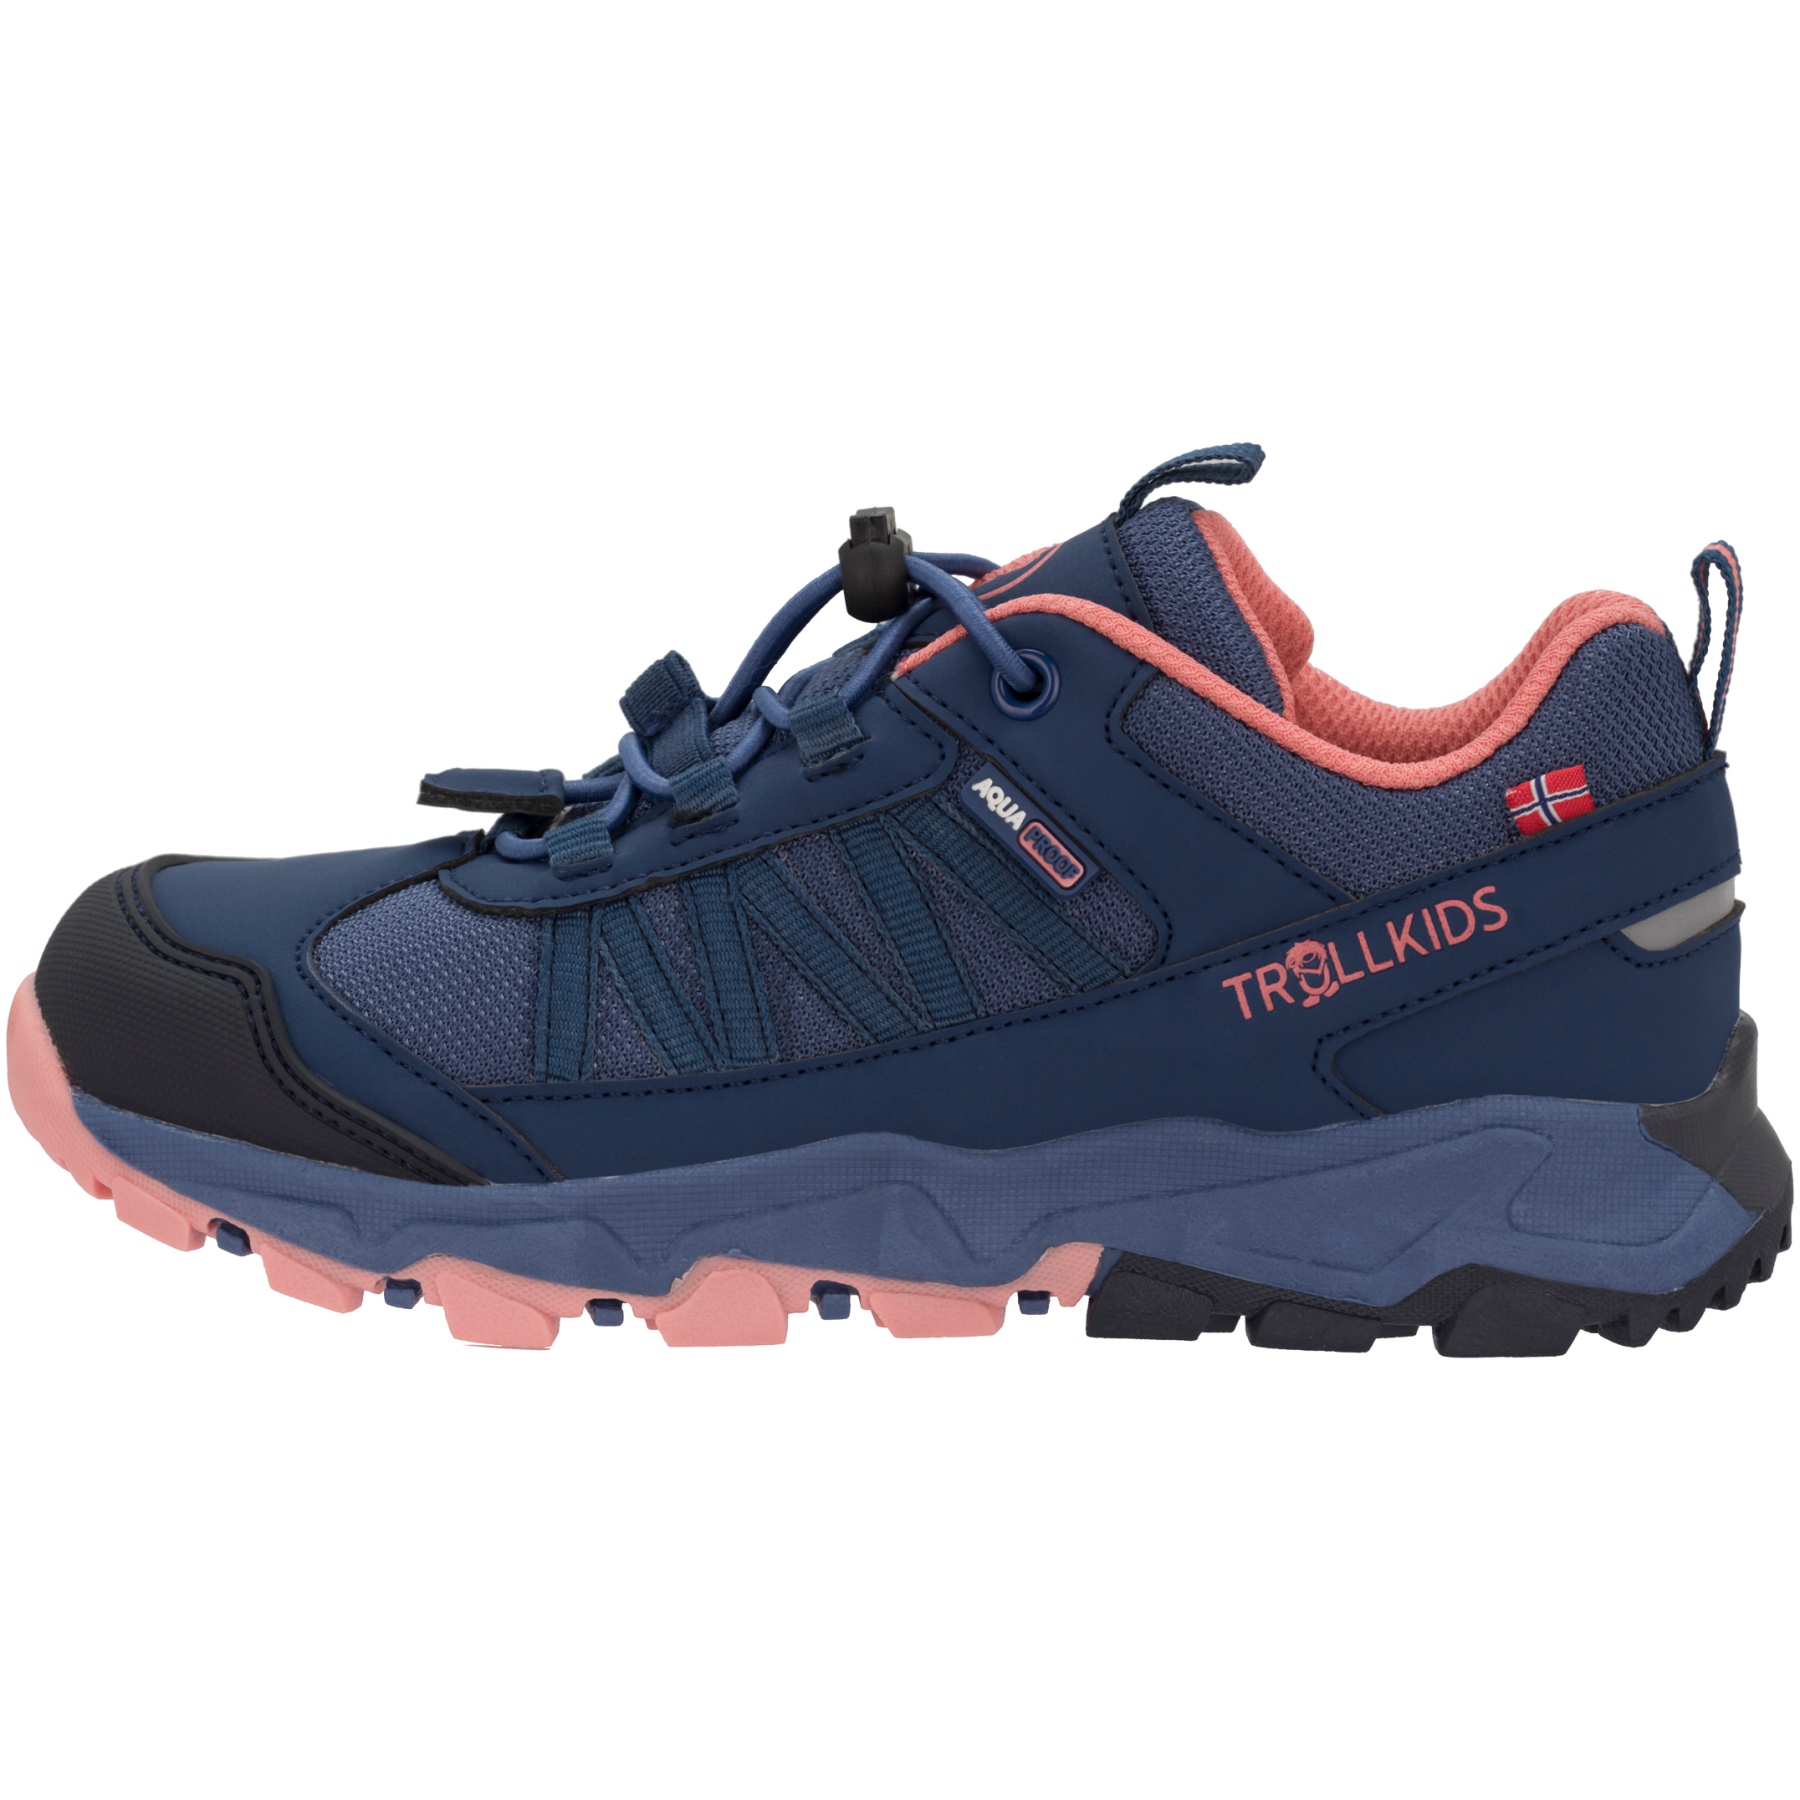 Picture of Trollkids Tronfjell Low Kids Hiker Shoes - Lotus Blue/Dahlia